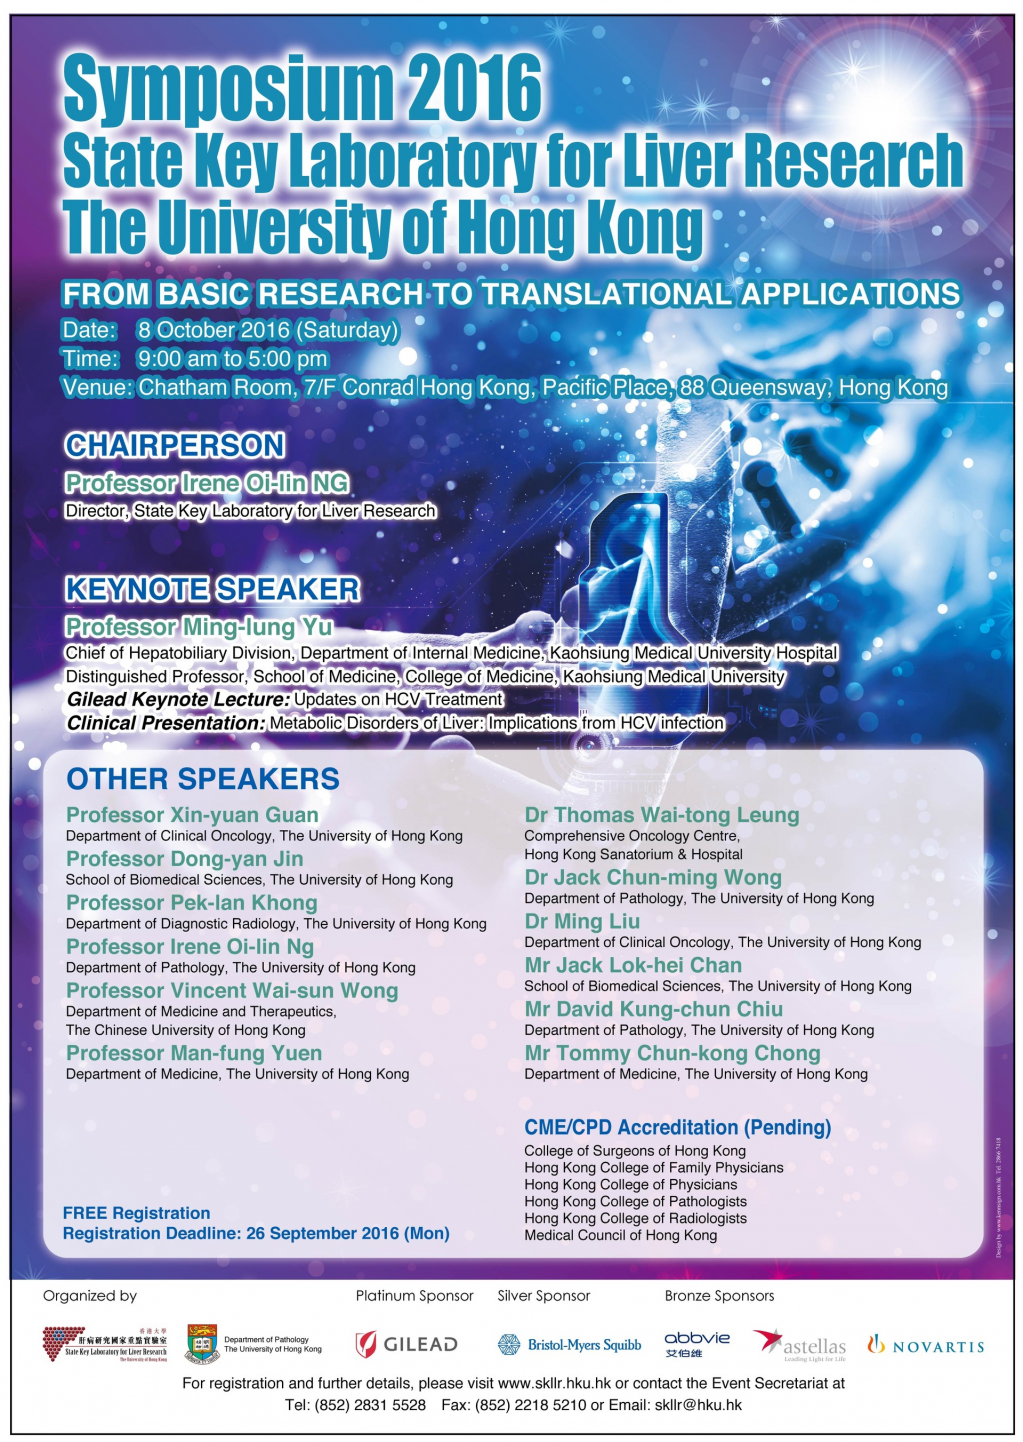 Symposium 2016 of State Key Laboratory for Liver Research, The University of Hong Kong